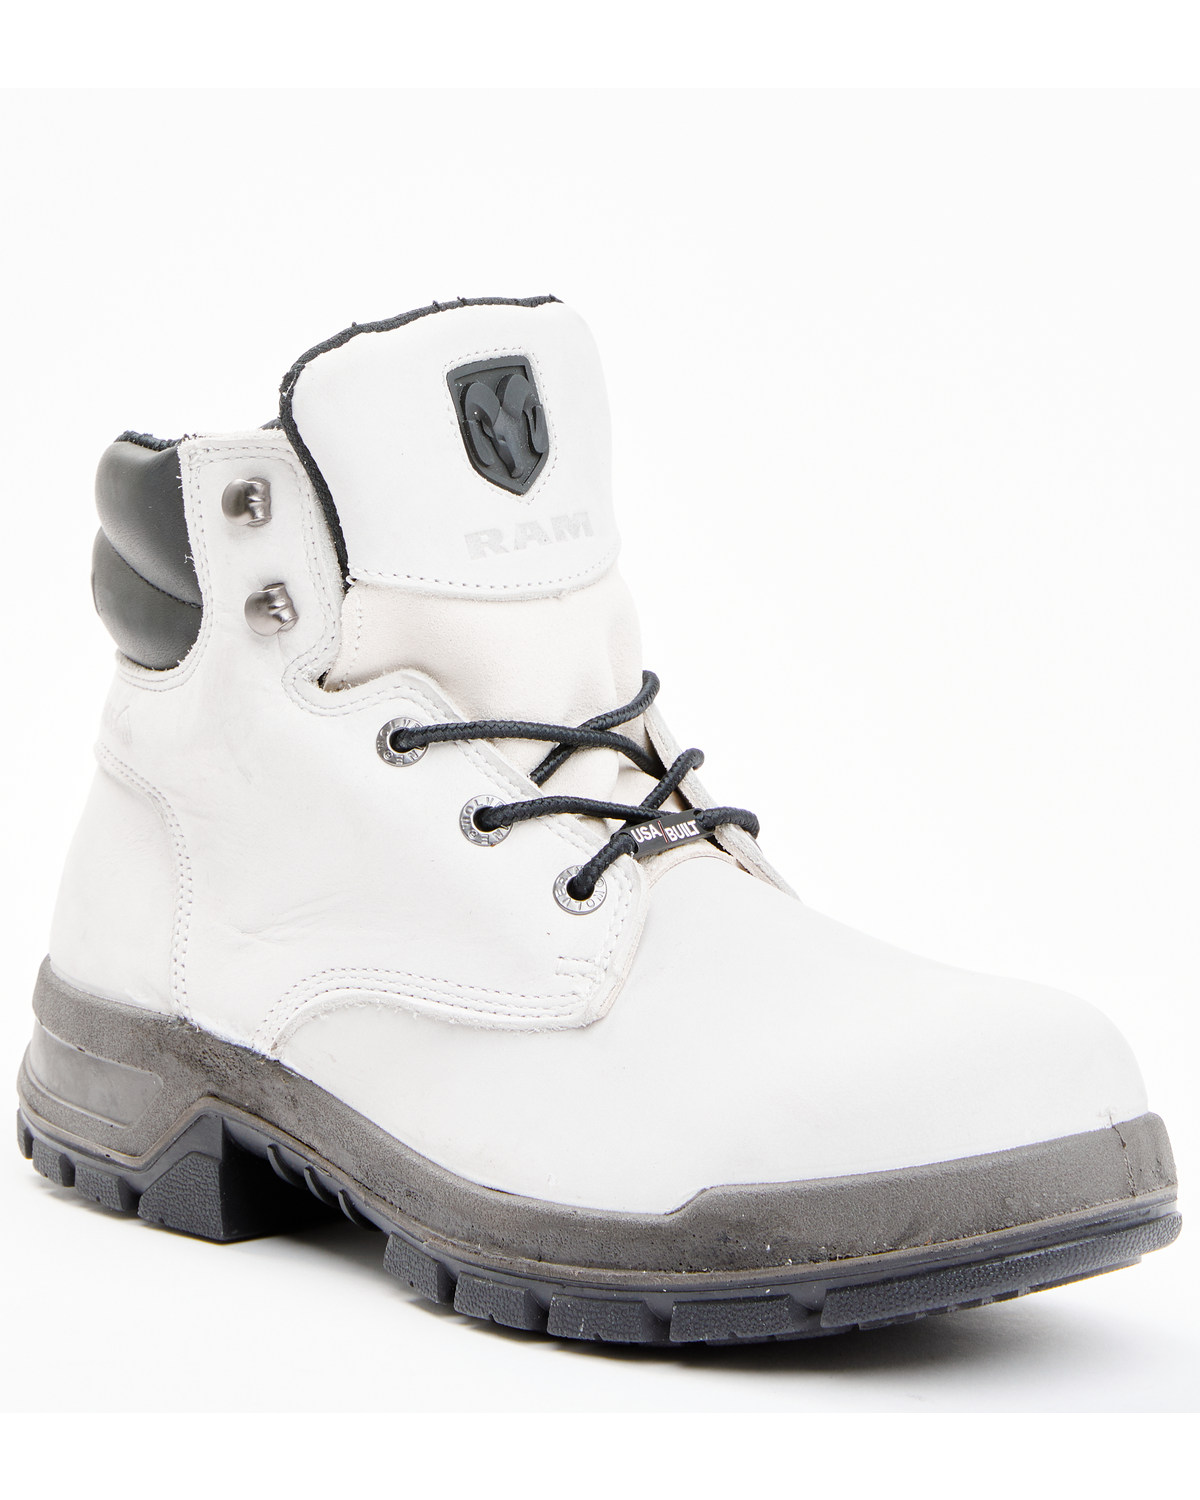 Wolverine x Ram Collection Men's Tradesman Work Boots - Composite Toe